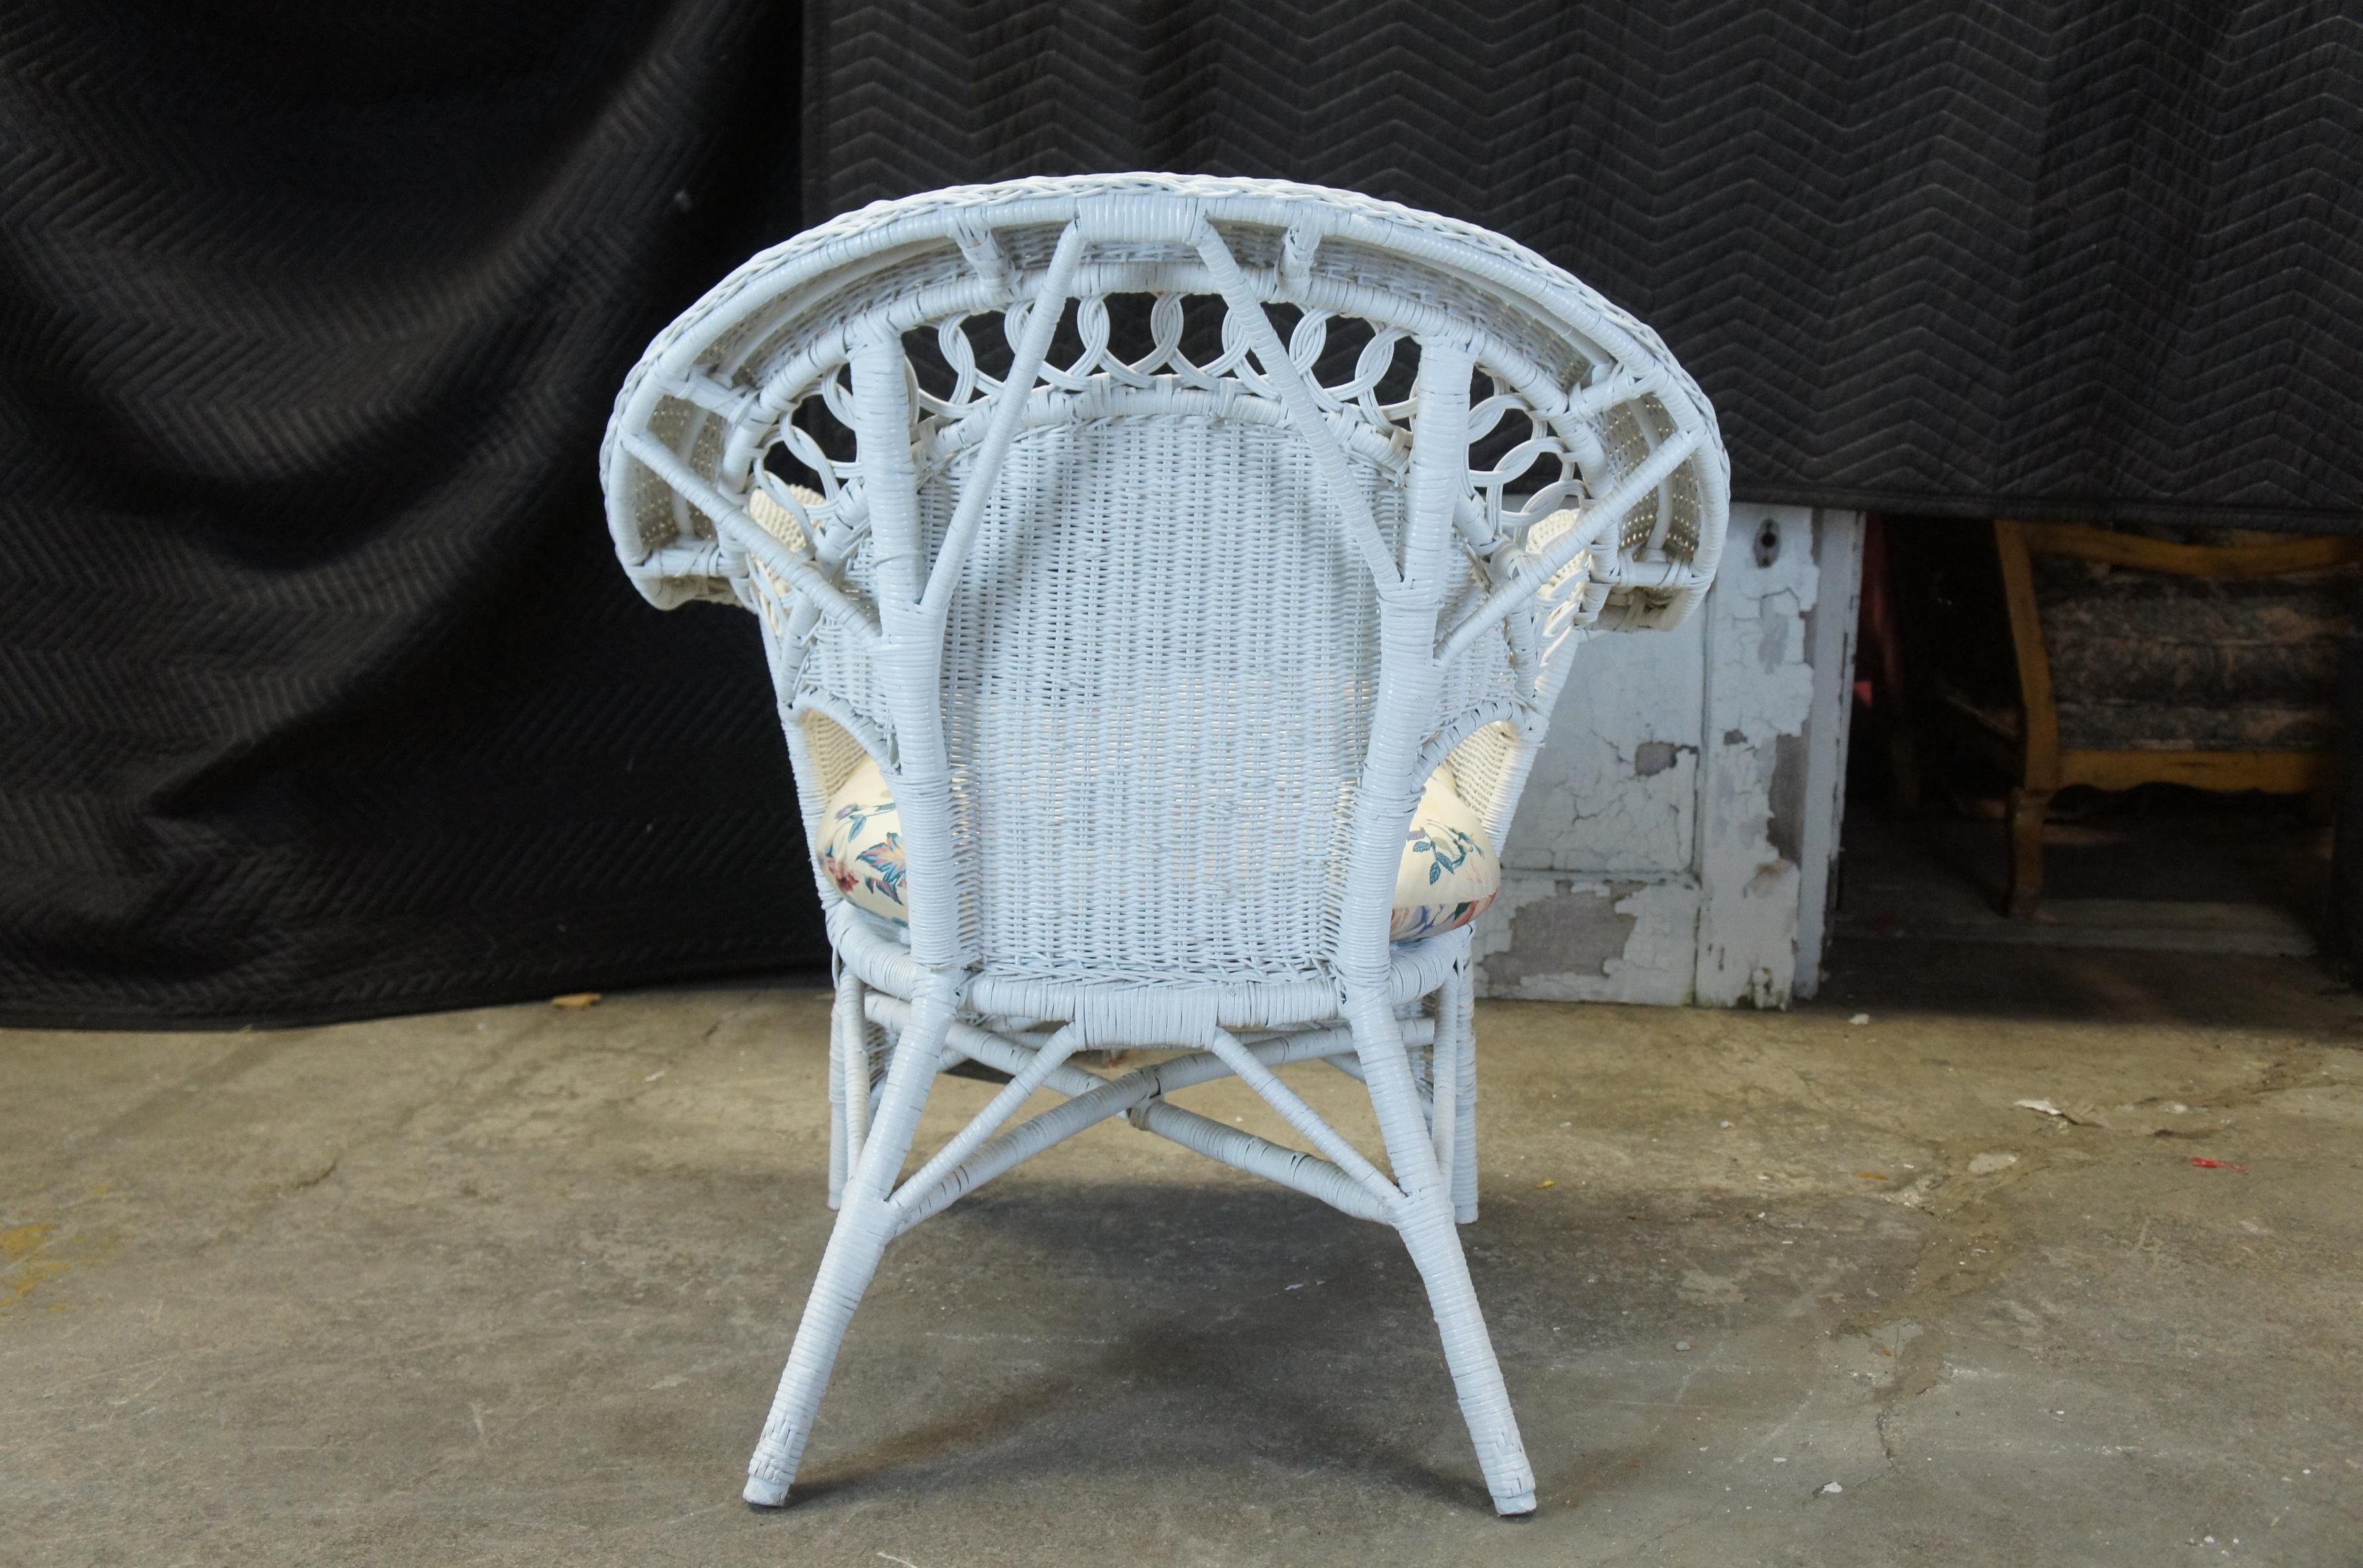 Bohemian 2 Vintage Wicker Bamboo Rattan Rolled Club Arm Chairs White Painted Boho Chic